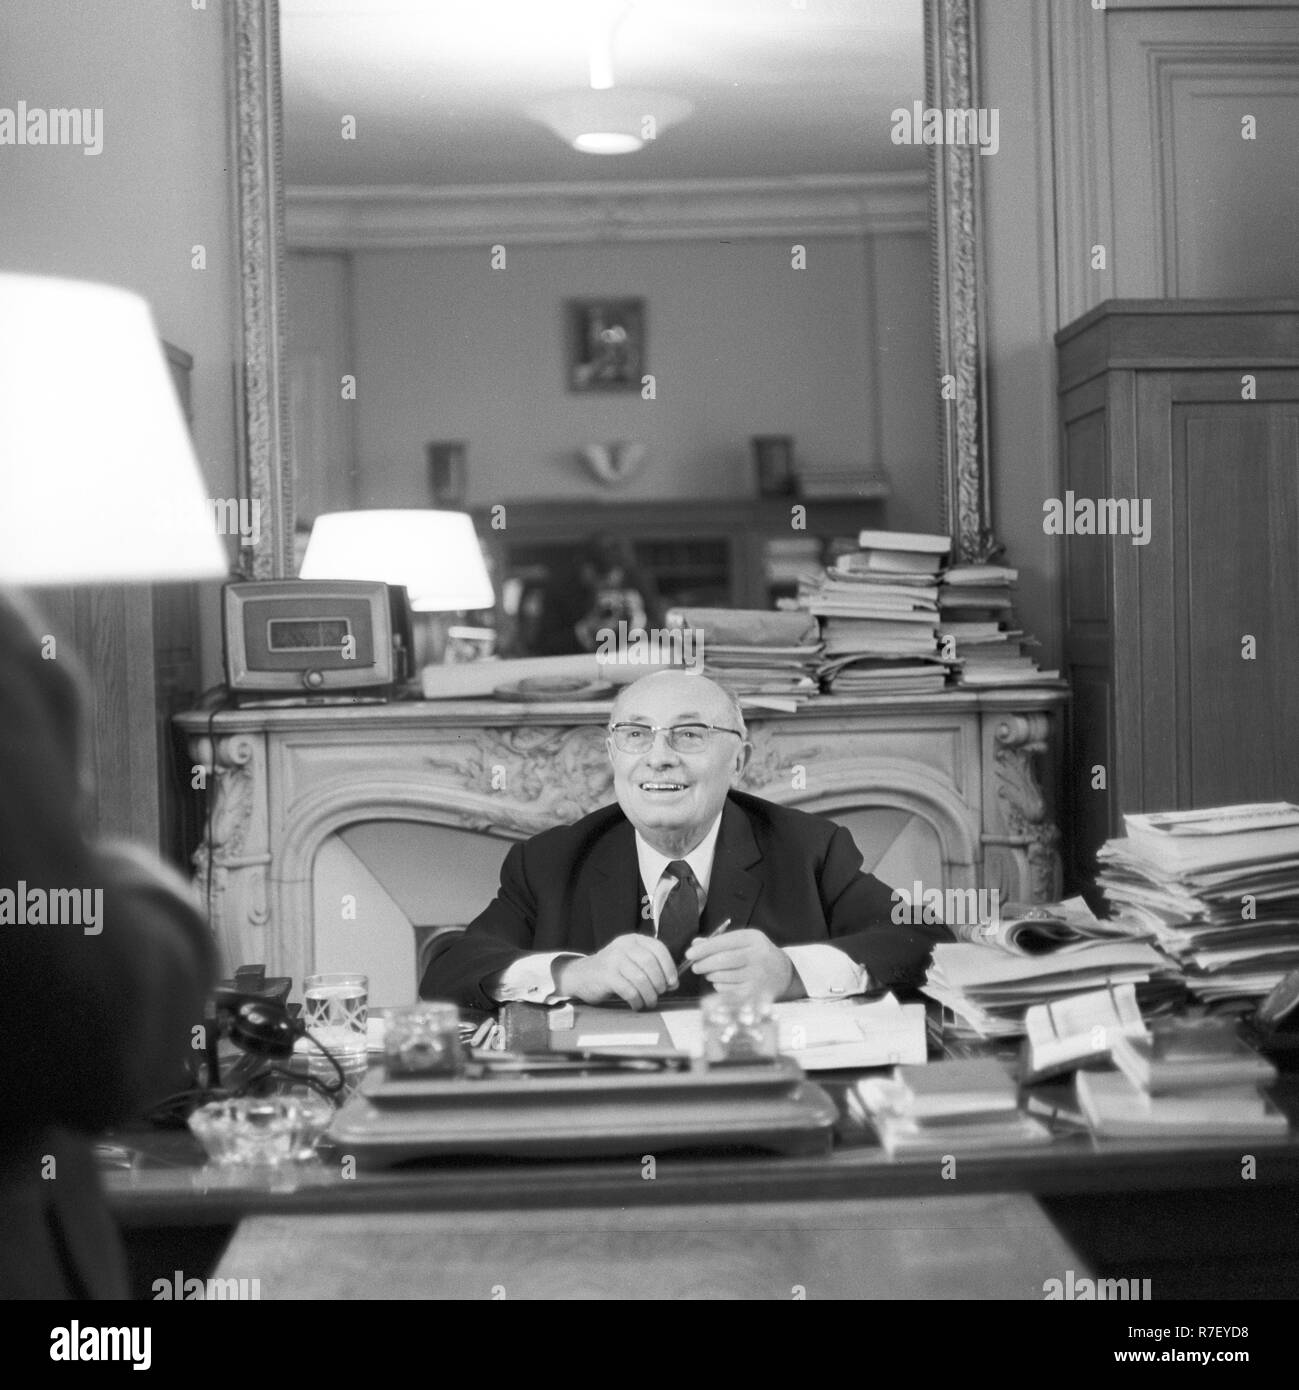 Communist politician Jacques Duclos is pictured in his office in Paris, France, in November 1970. Duclos reached 21, 2 percent in the French presidential elections in 1969, the highest percentage a Communist candidate ever reached. Photo: Wilfried Glienke | usage worldwide Stock Photo